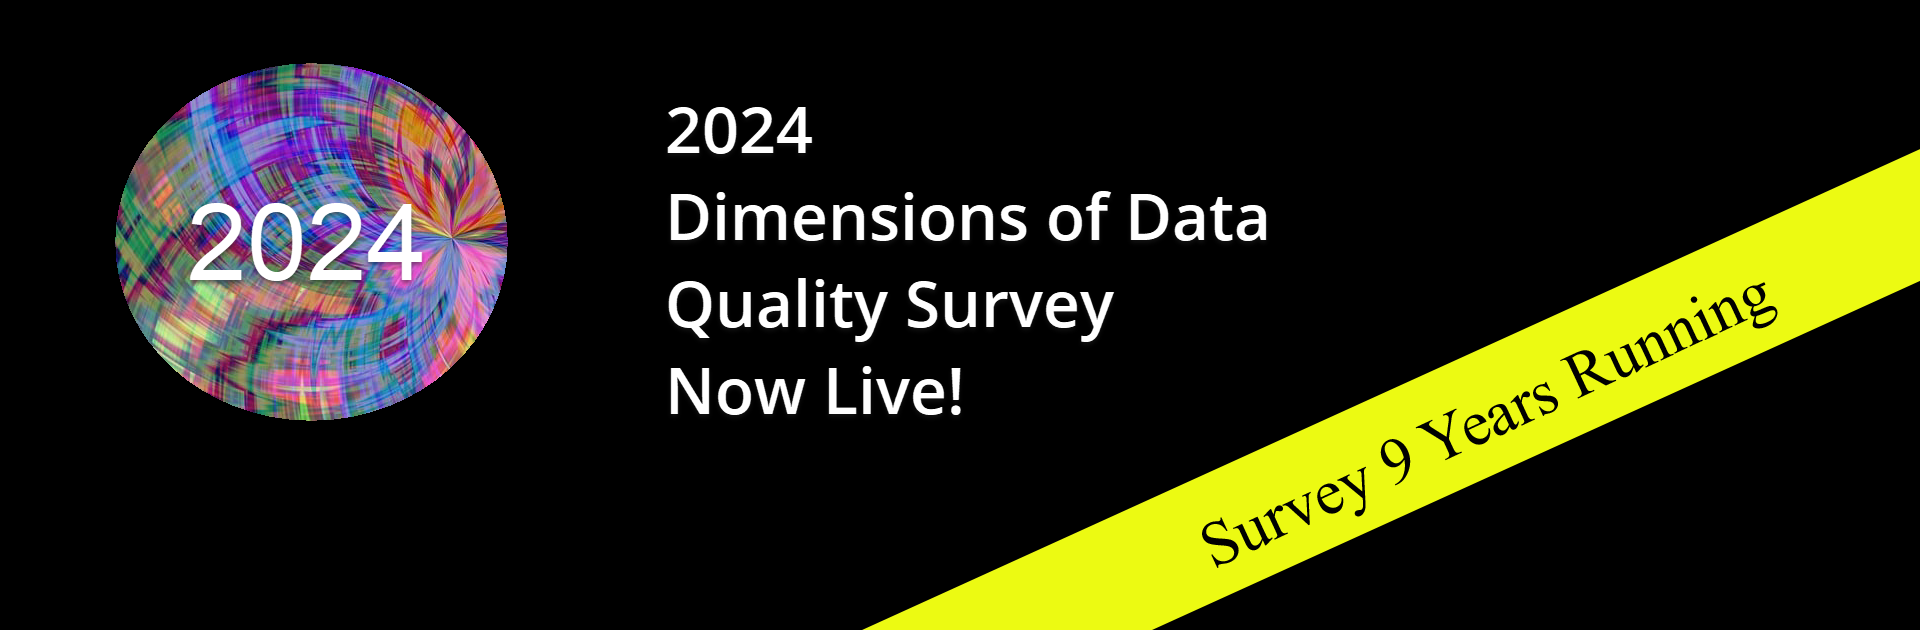 2024 Dimensions of Data Quality Survey